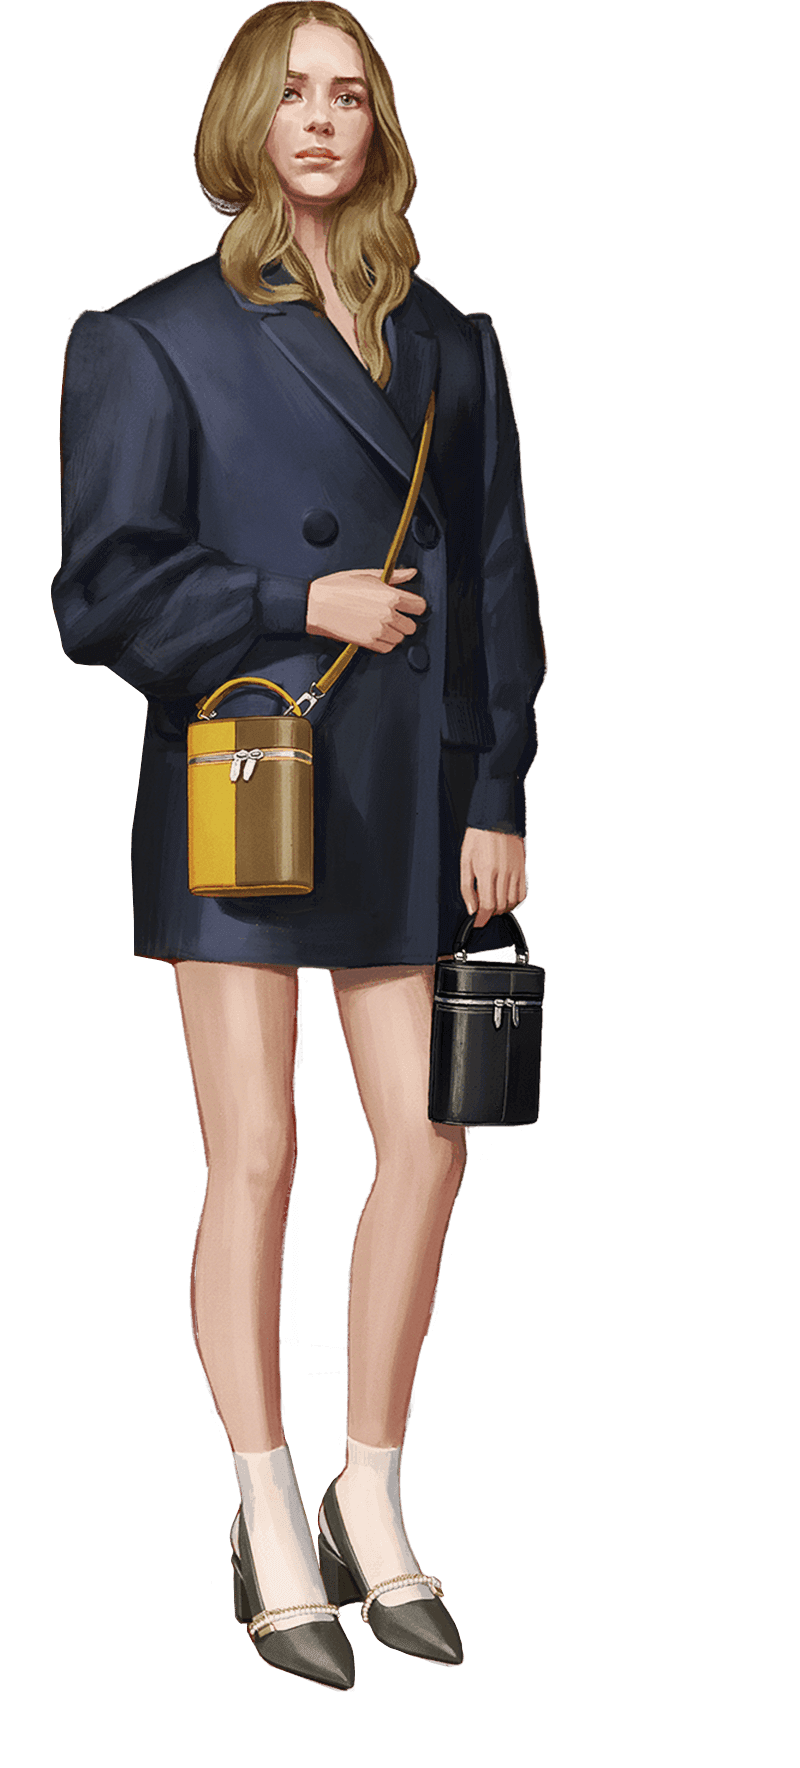 A compilation of illustrations from the CHARLES & KEITH Autumn Winter 2020 campaign - CHARLES & KEITH - Web - Model 2